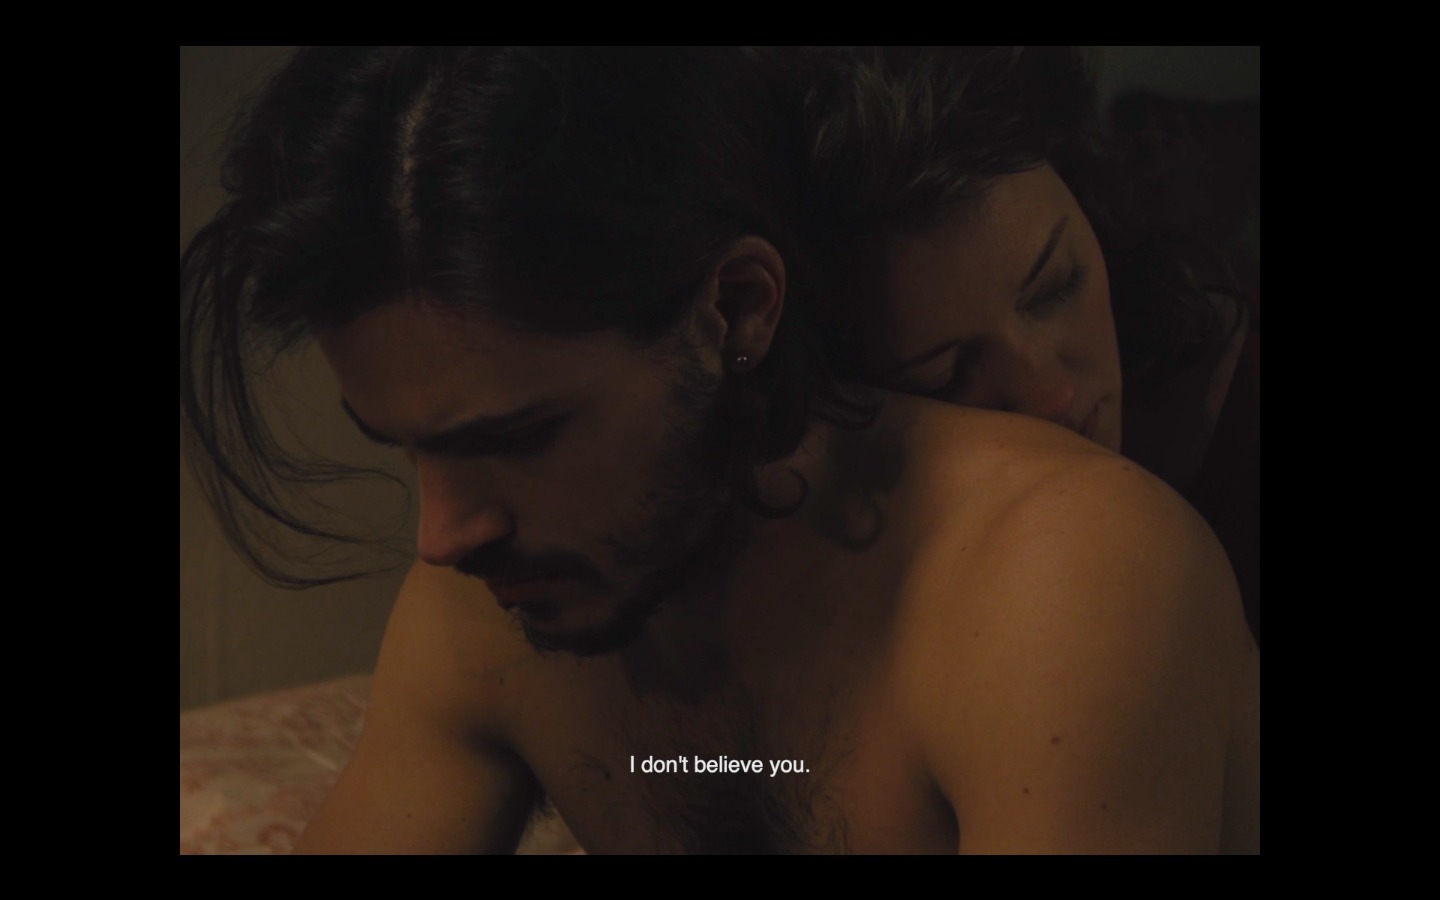 Matthieu Charneau & Sofie Hoflack in 'And Sunday The Deluge' (2015)